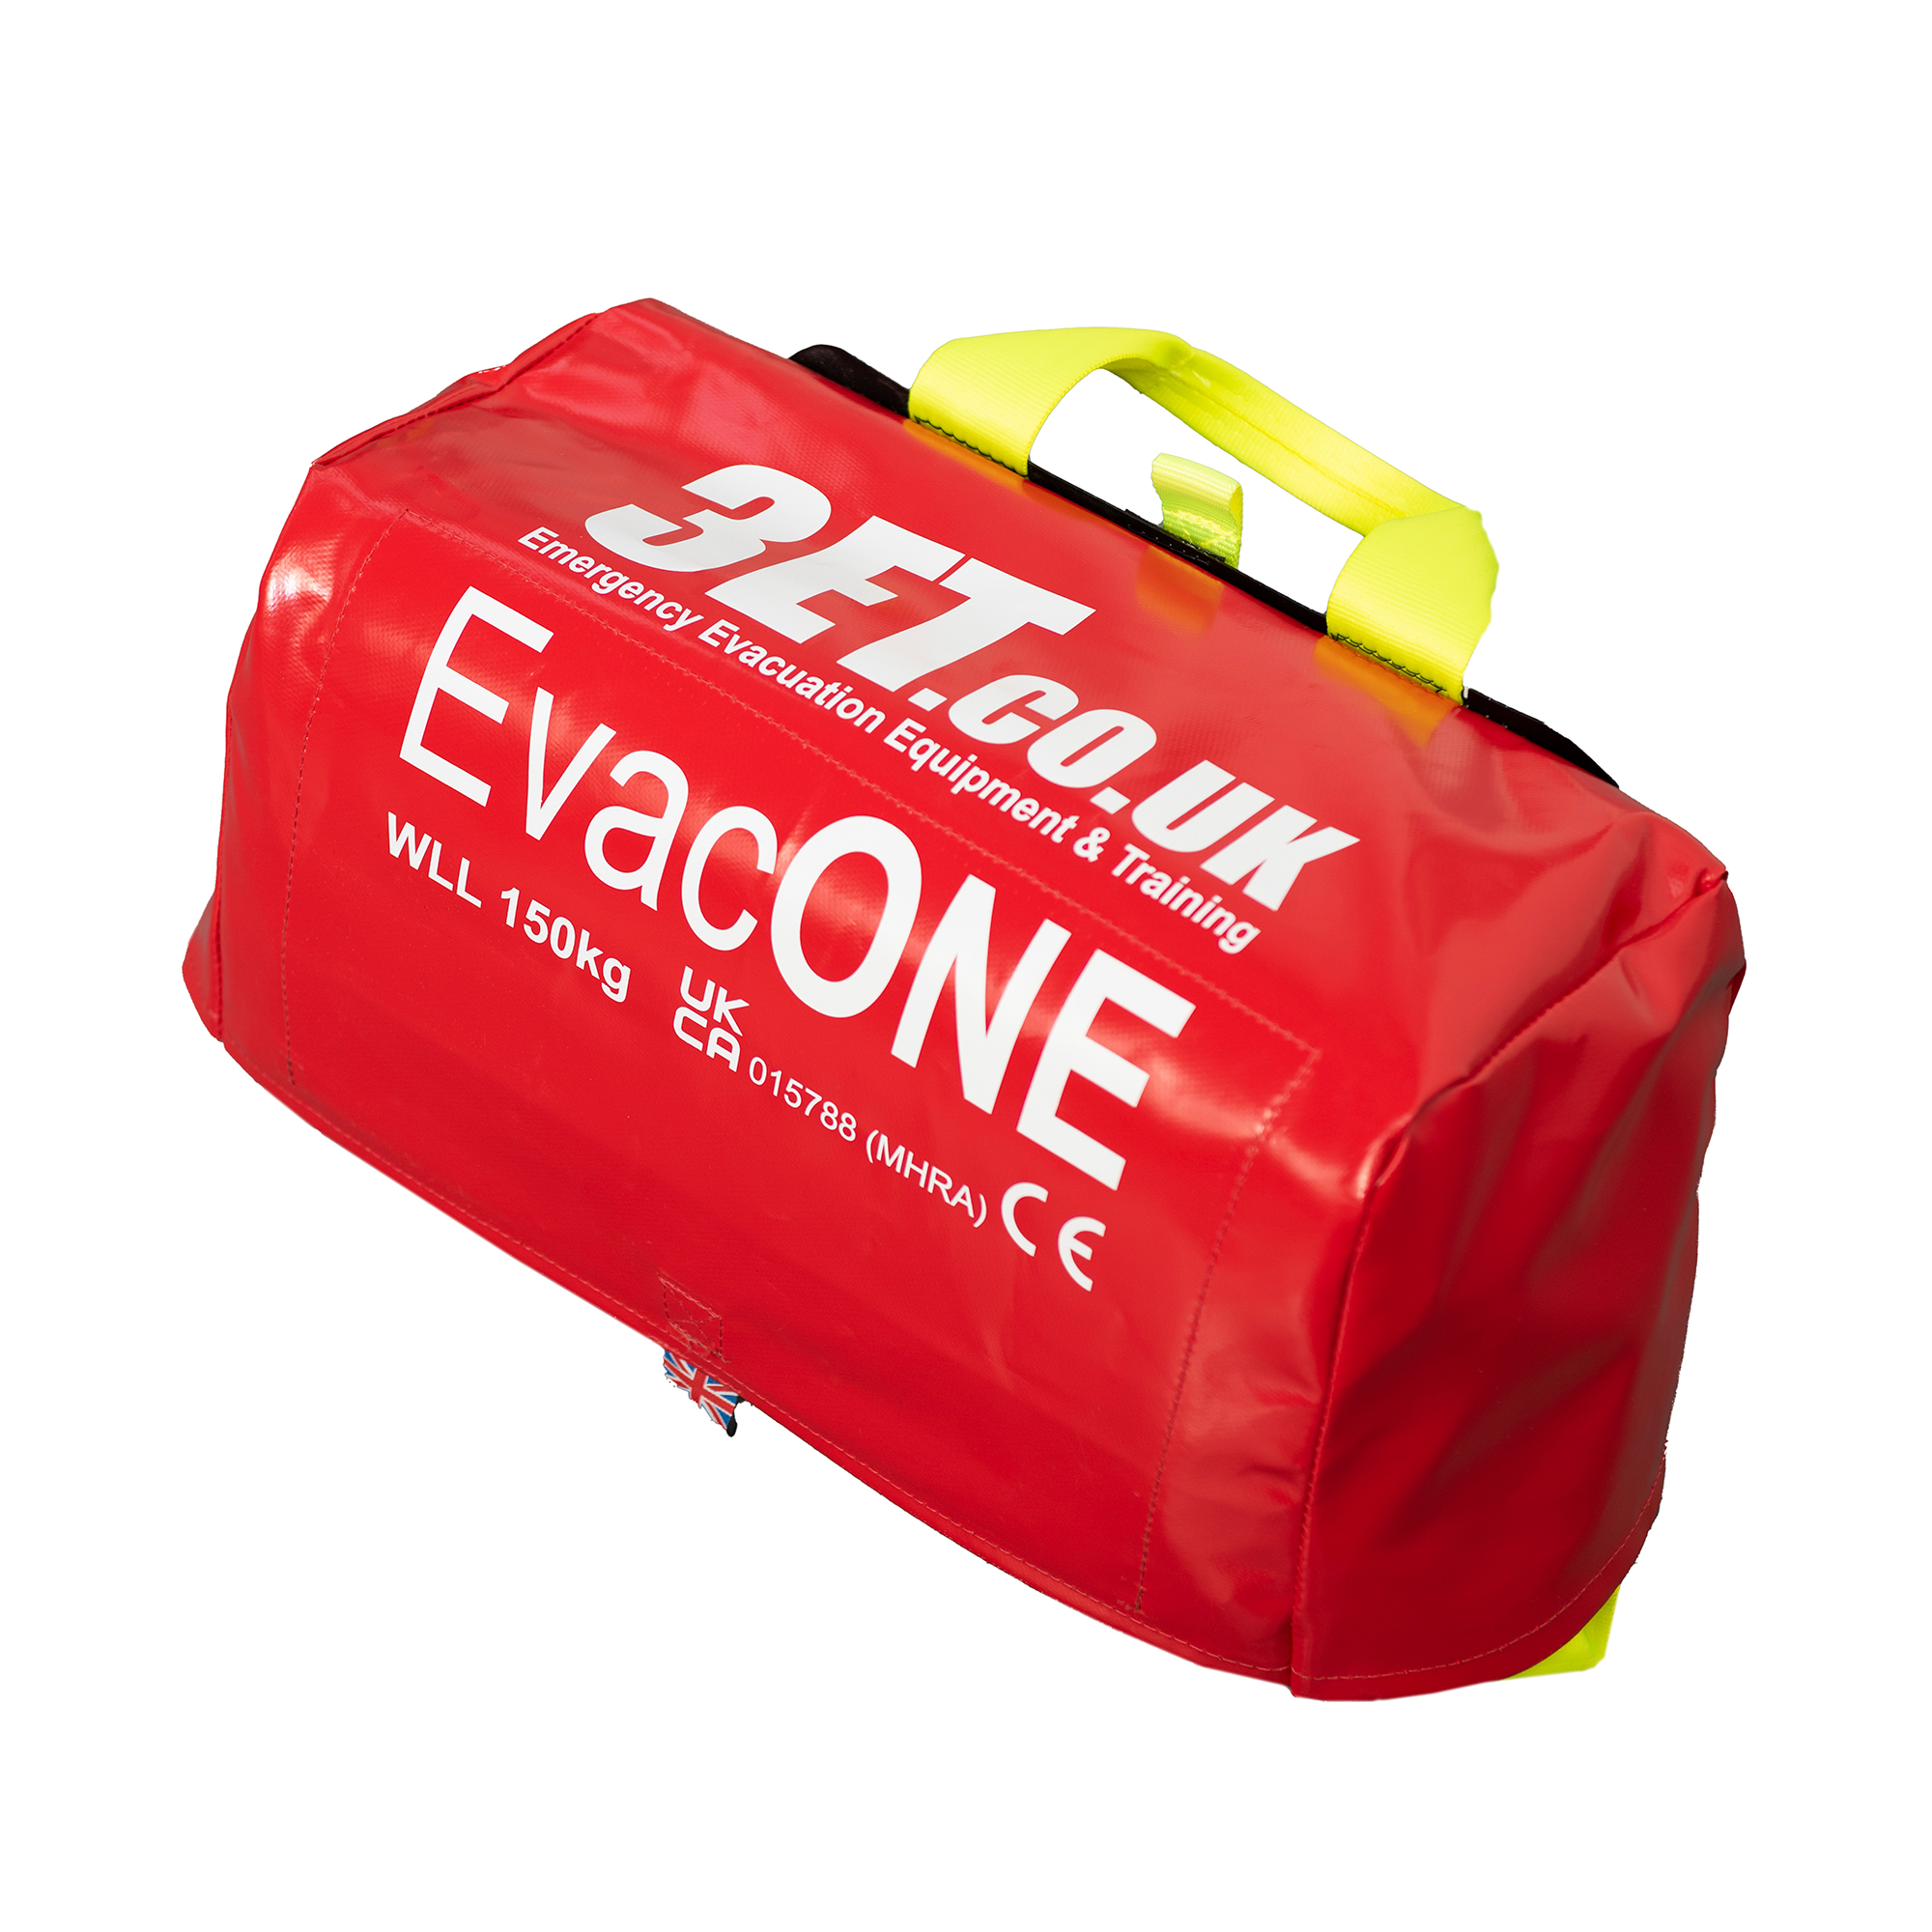 EvacONE mat is designed to evacuate vertically both up and down staircases